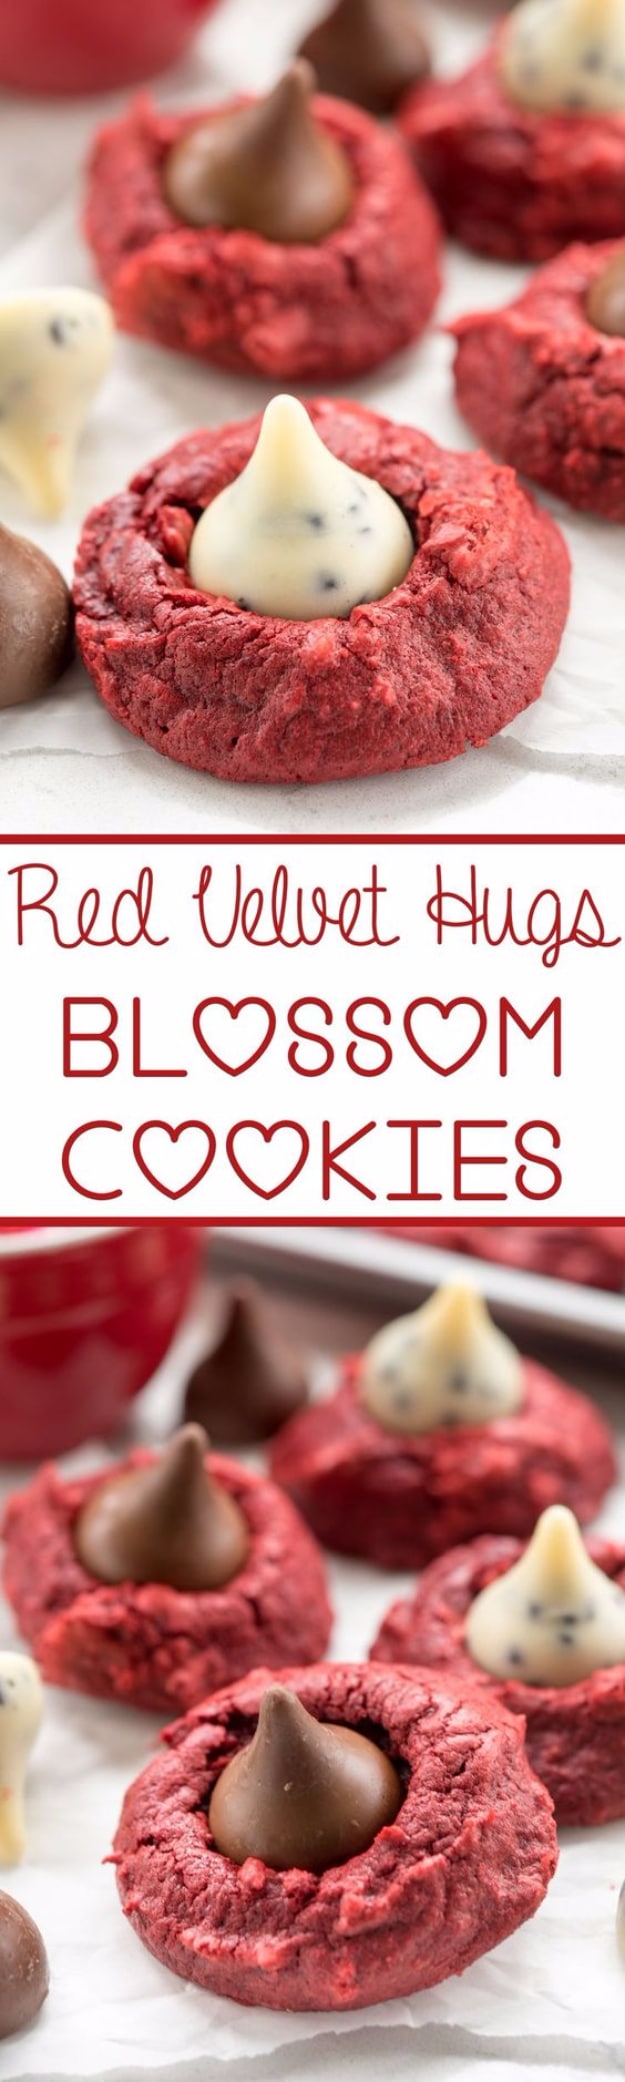 DIY Valentines Day Cookies - Red Velvet Hugs Cookies - Easy Cookie Recipes and Recipe Ideas for Valentines Day - Cute DIY Decorated Cookies for Kids, Homemade Box Cookies and Bouquet Ideas - Sugar Cookie Icing Tutorials With Step by Step Instructions - Quick, Cheap Valentine Gift Ideas for Him and Her #valentines